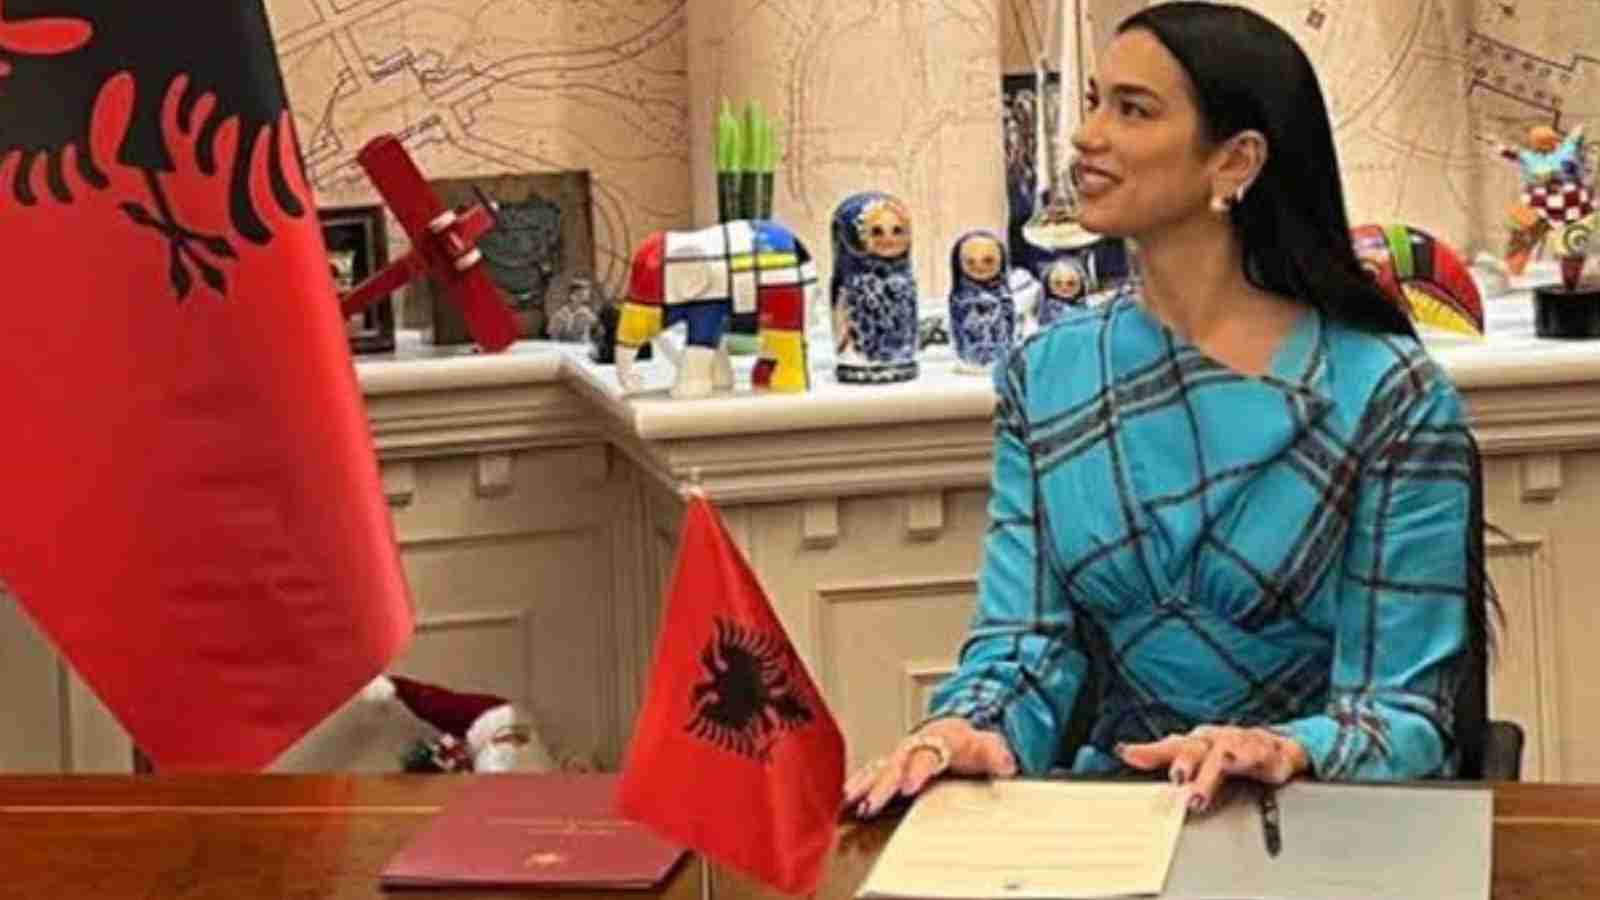 Dua Lipa during ceremony granting her the citizenship of Albania